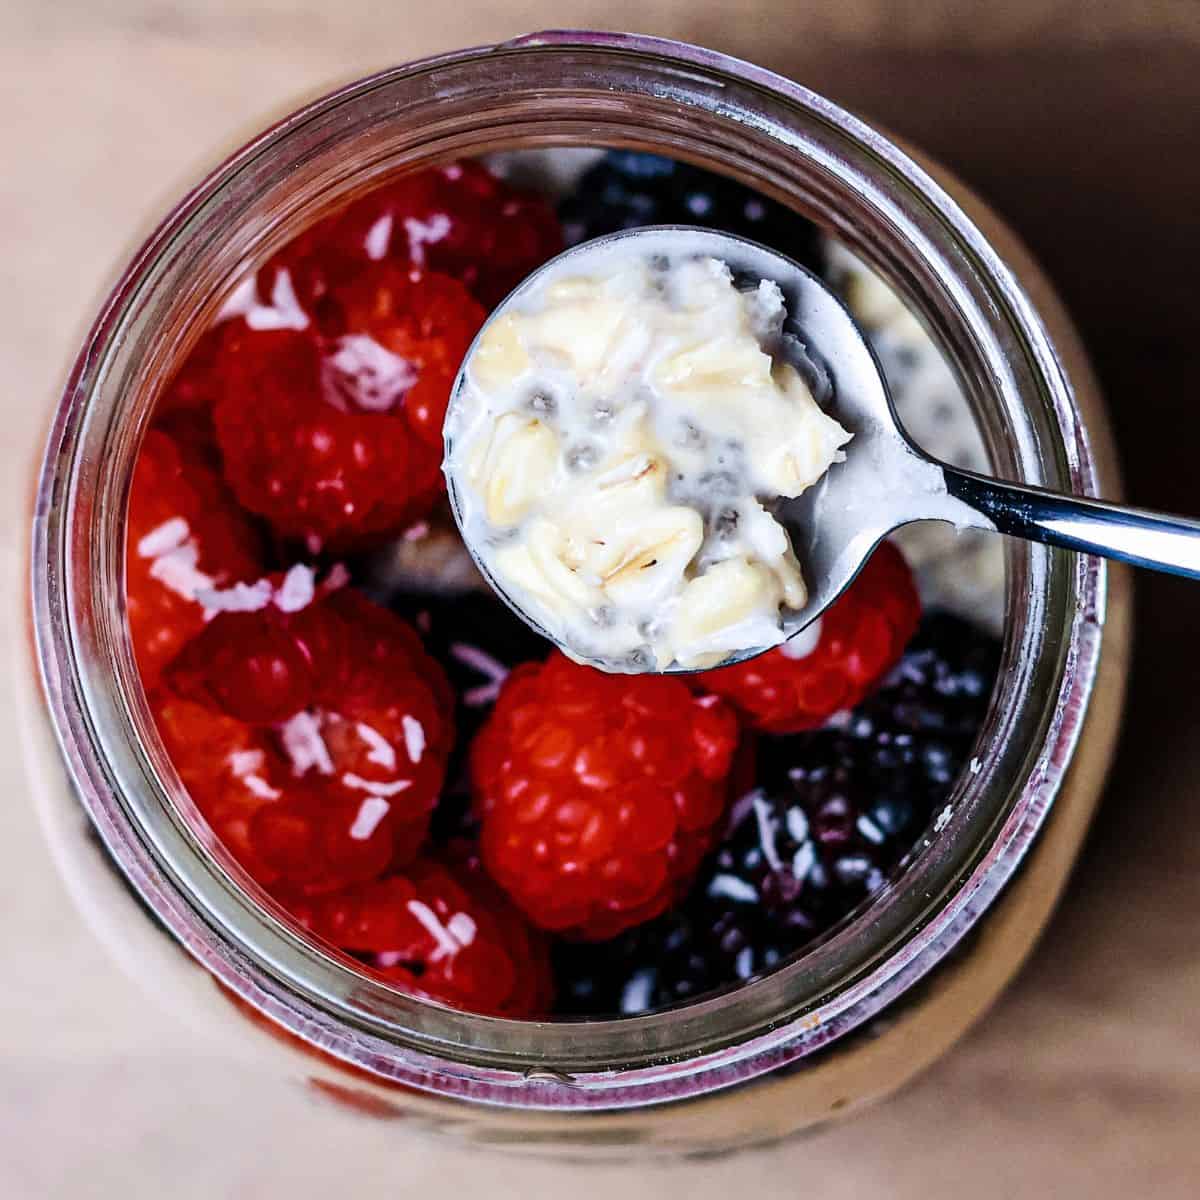 Close-up of a spoon lifting a portion of overnight oats with coconut milk from a jar, revealing the creamy texture and mixed-in chia seeds, with raspberries and blackberries on top.